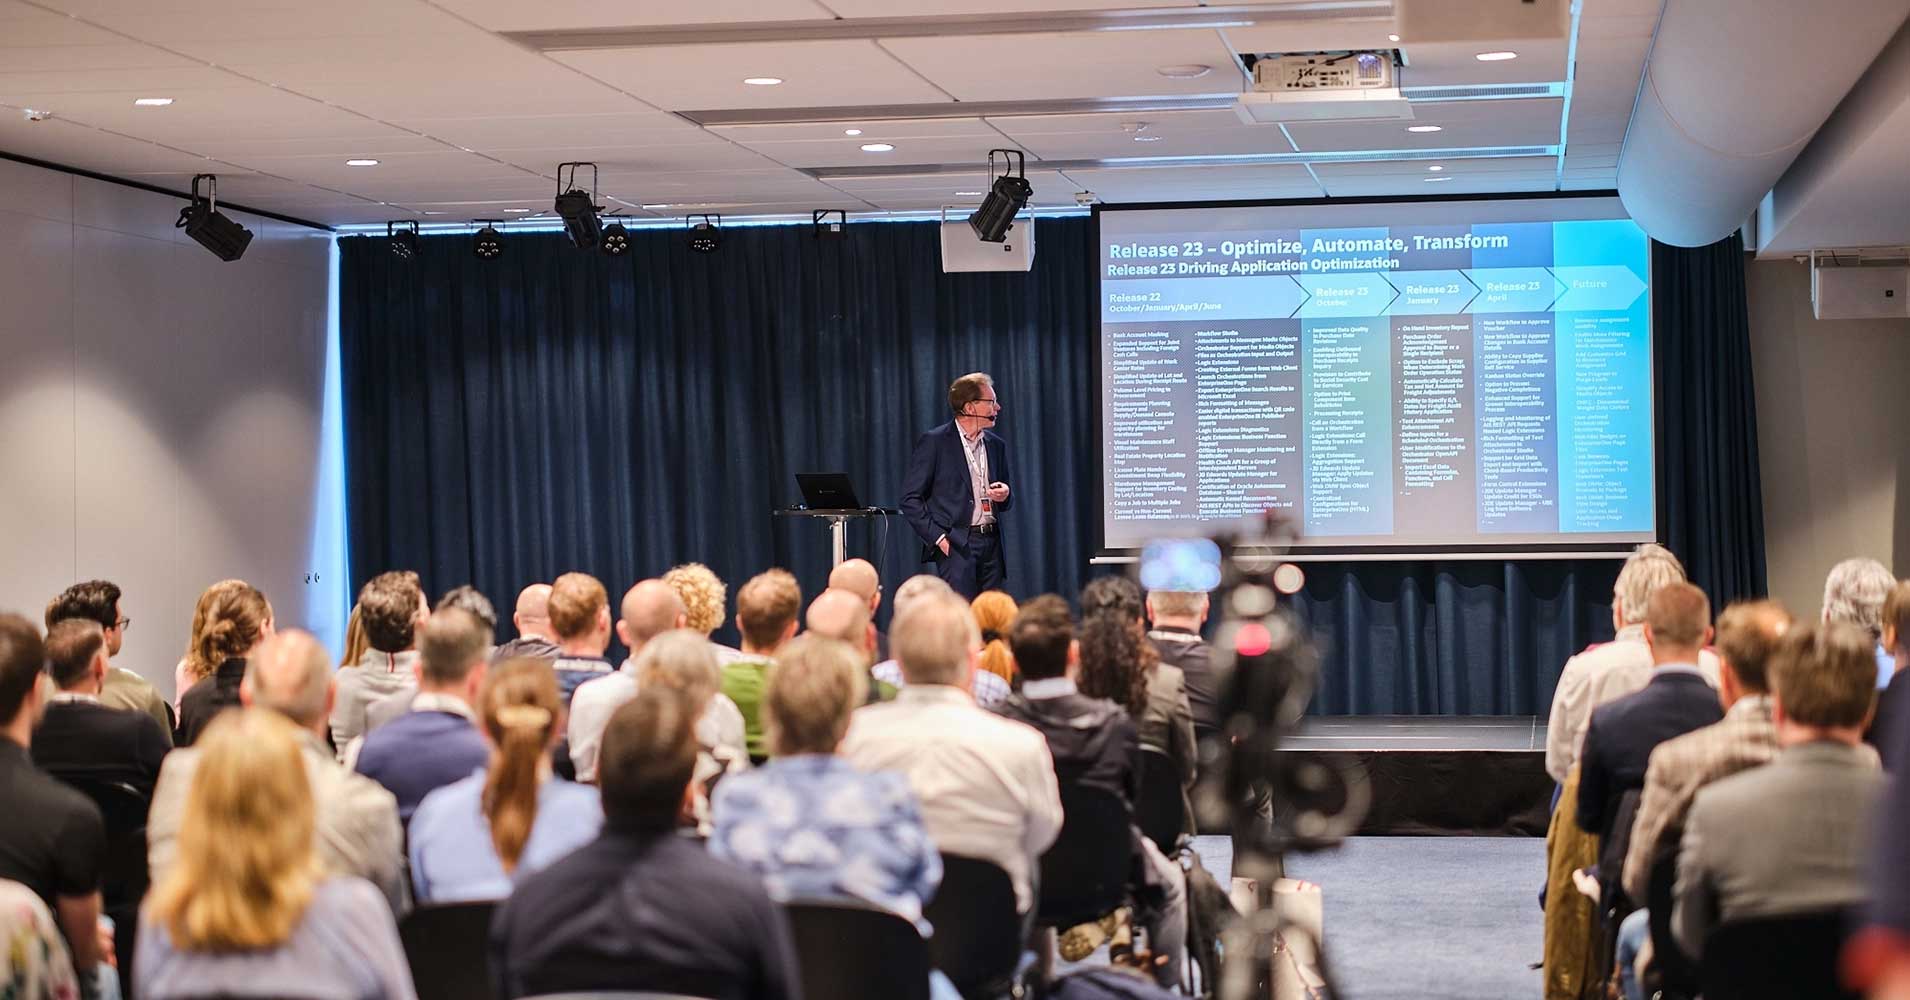 Highlights from the JD Edwards Nordic Conference